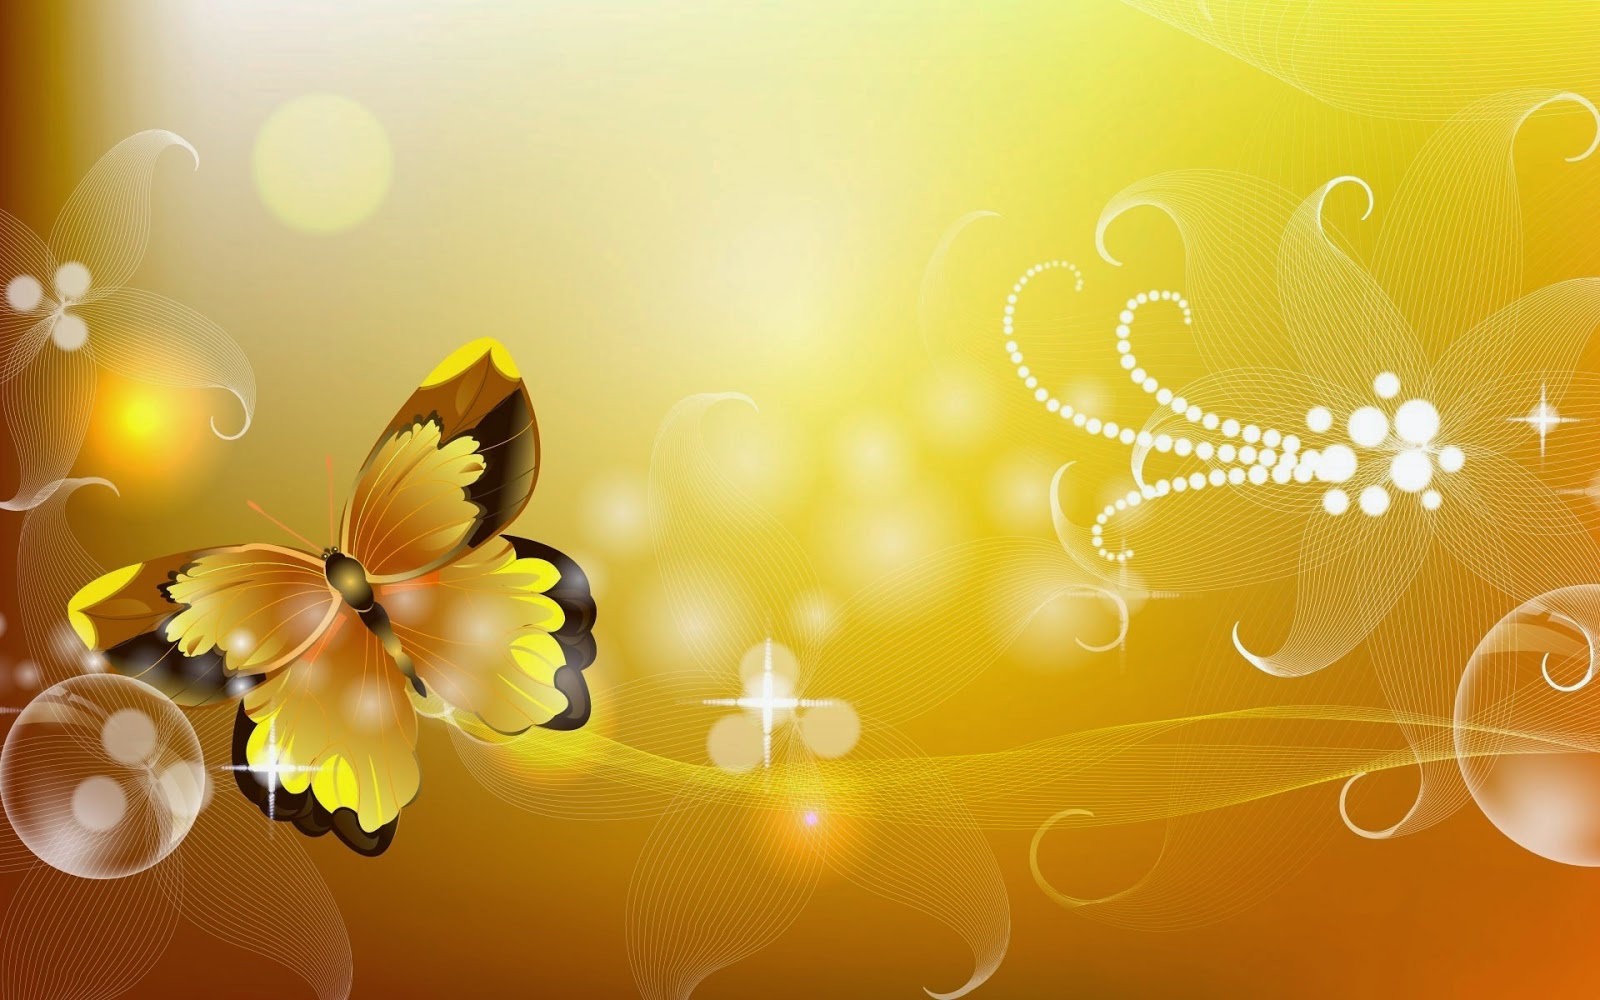 Colorful Butterfly designs background for desktop Abstract